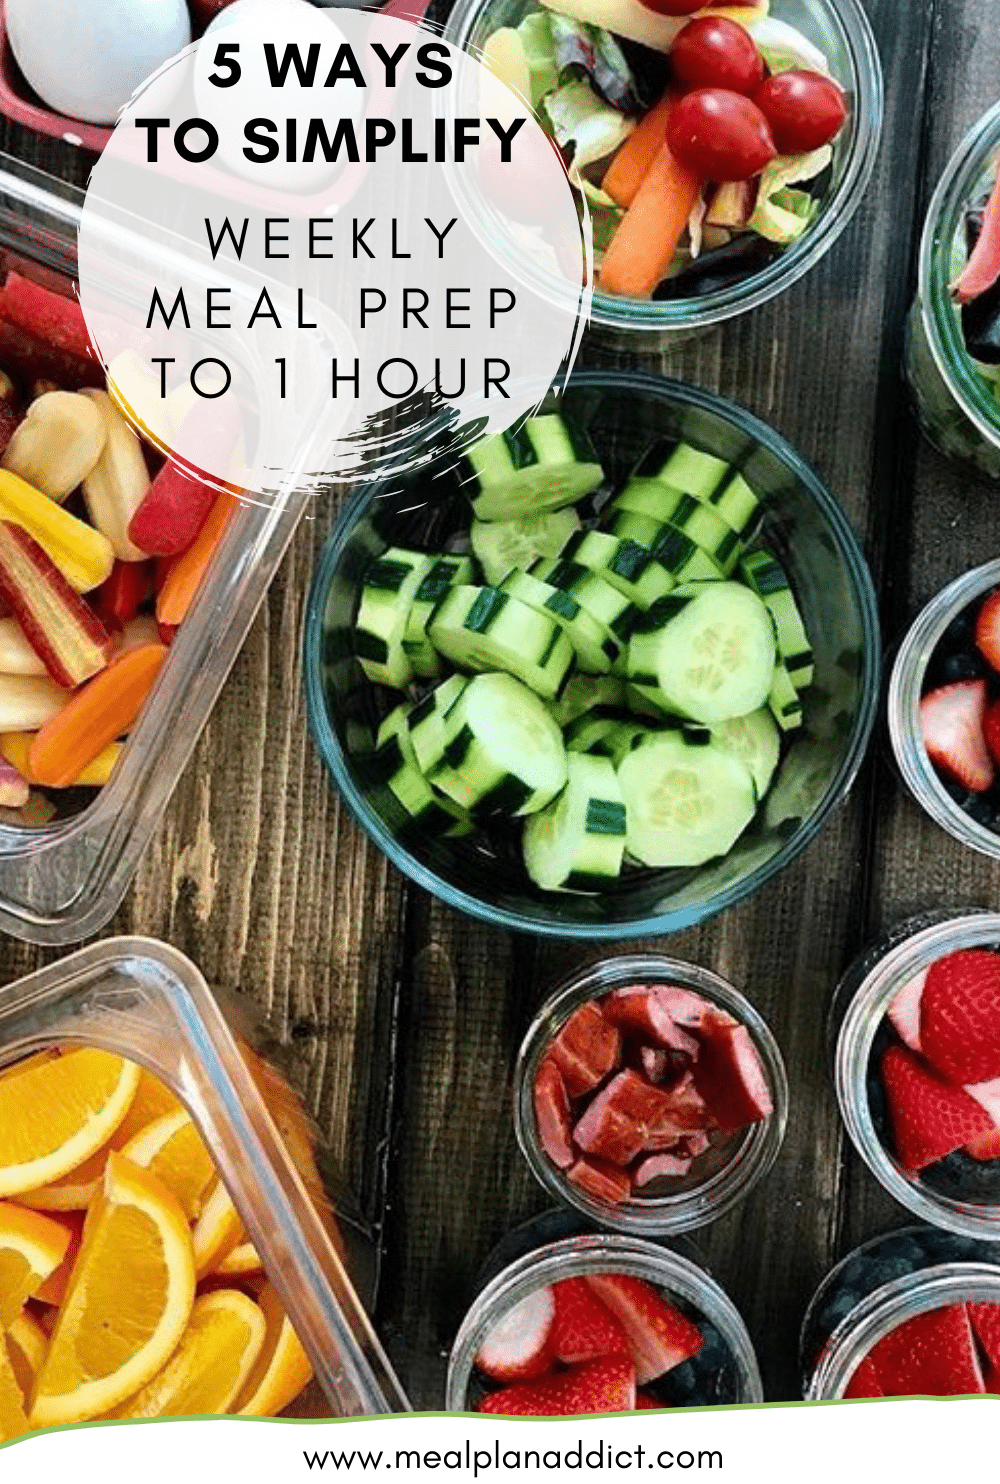 5 Ways to Simplify Weekly Meal Prep to 1 Hour